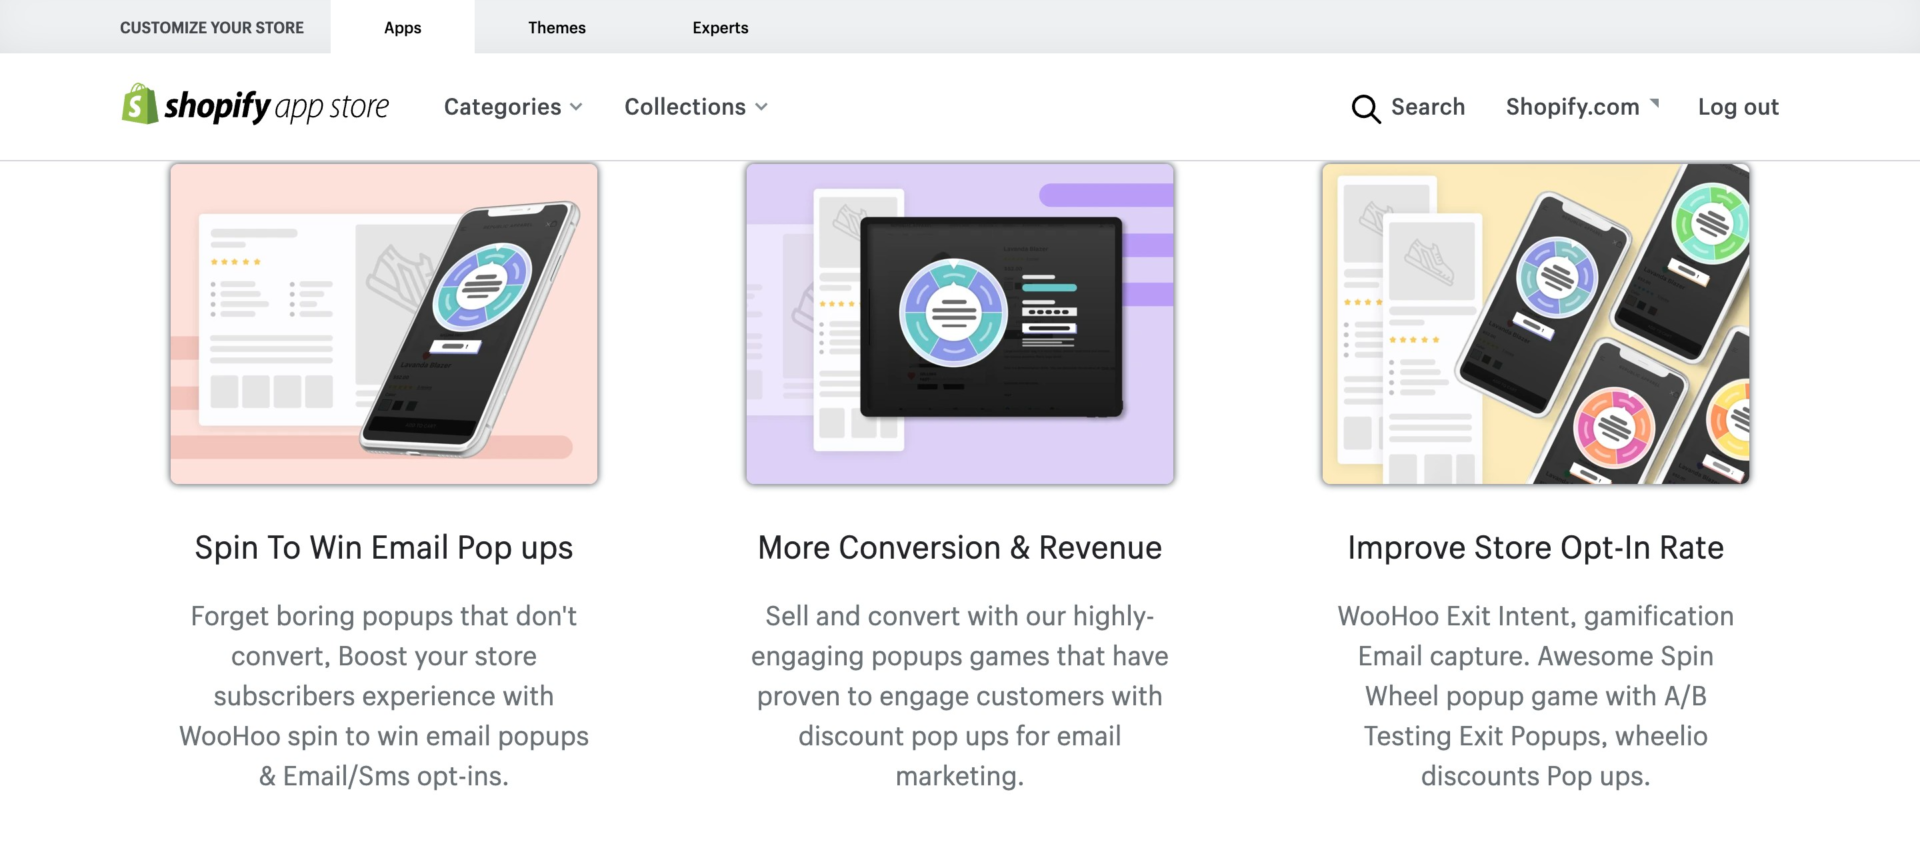 apps for increasing conversion rate: Woo Spin Popups: Wheel Popups 